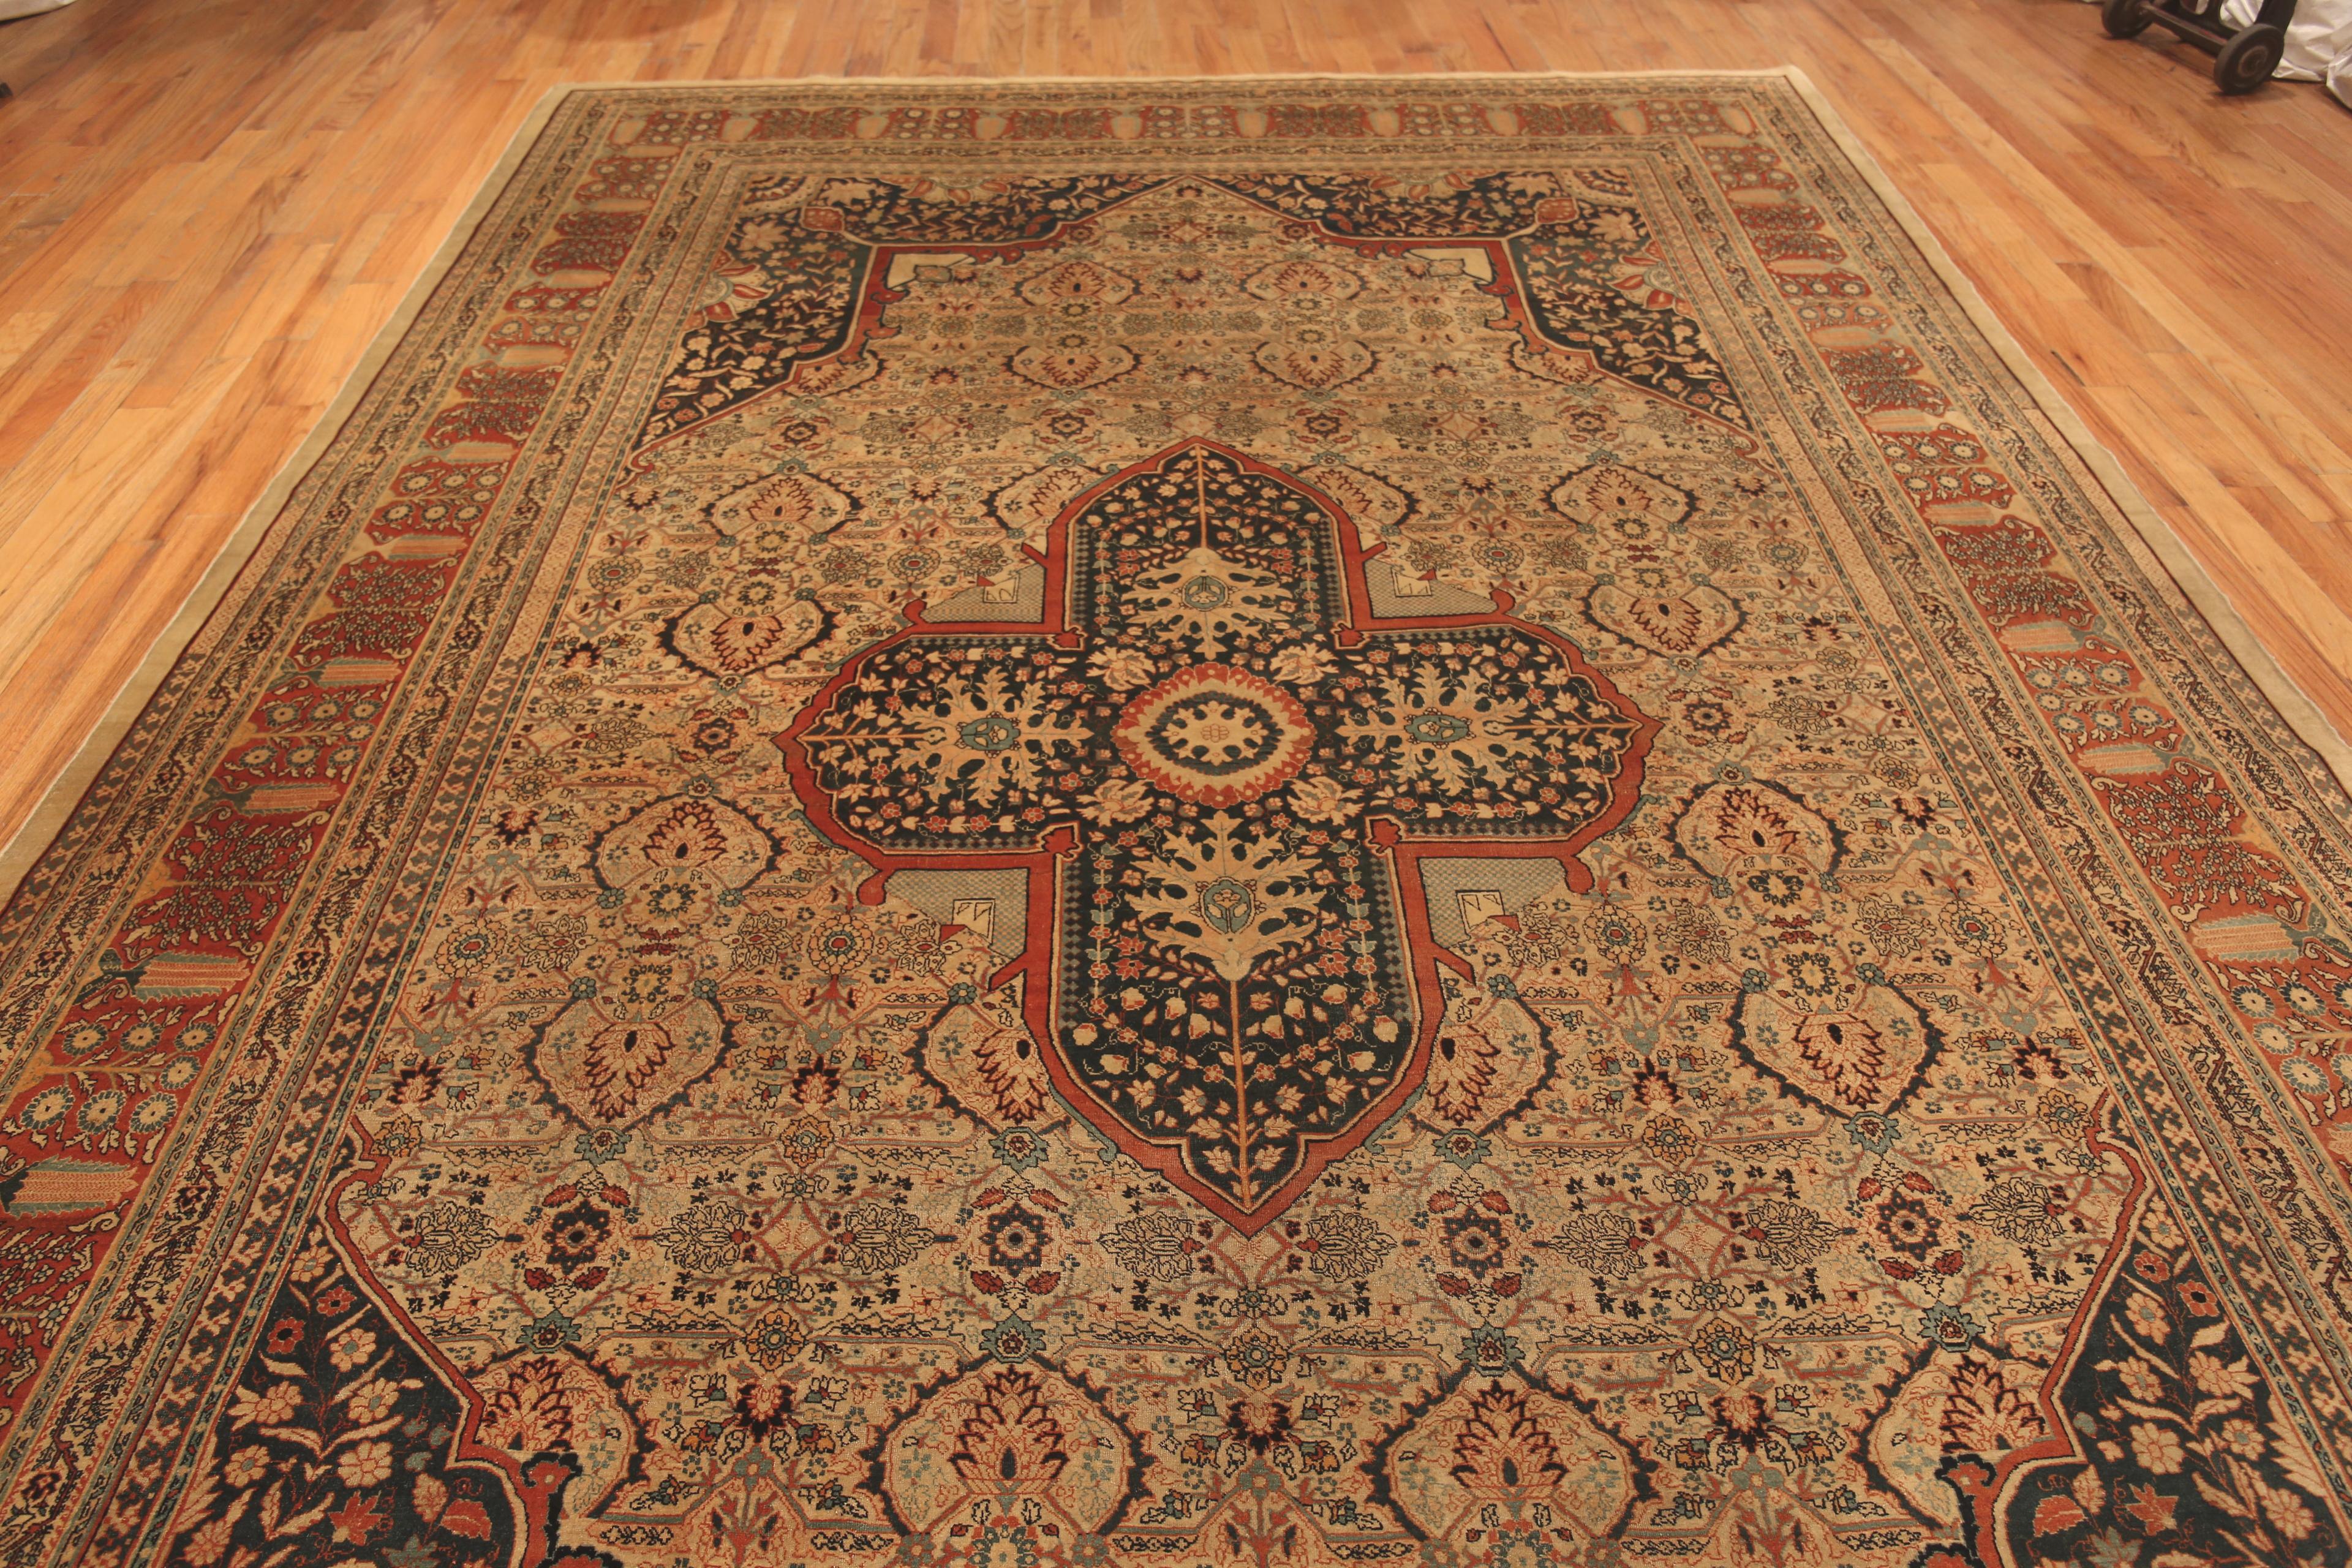 Large Antique Persian Tabriz Haji Jalili Rug, Country of Origin: Persian Rugs, Circa date: 1880. Size: 9 ft 6 in x 15 ft 4 in (2.9 m x 4.67 m)